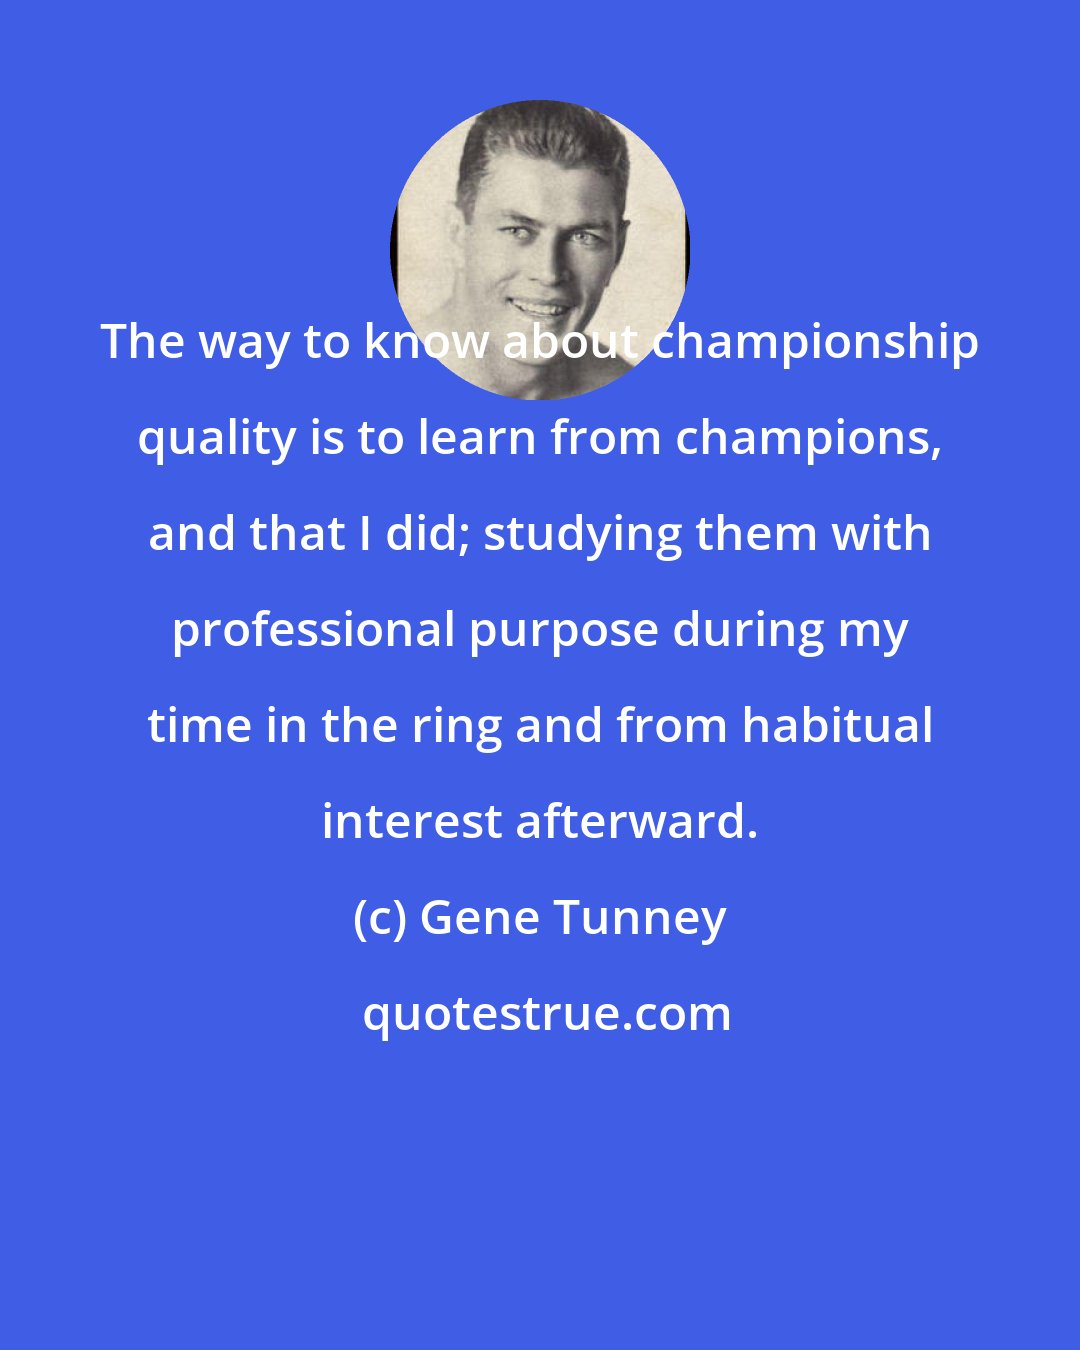 Gene Tunney: The way to know about championship quality is to learn from champions, and that I did; studying them with professional purpose during my time in the ring and from habitual interest afterward.